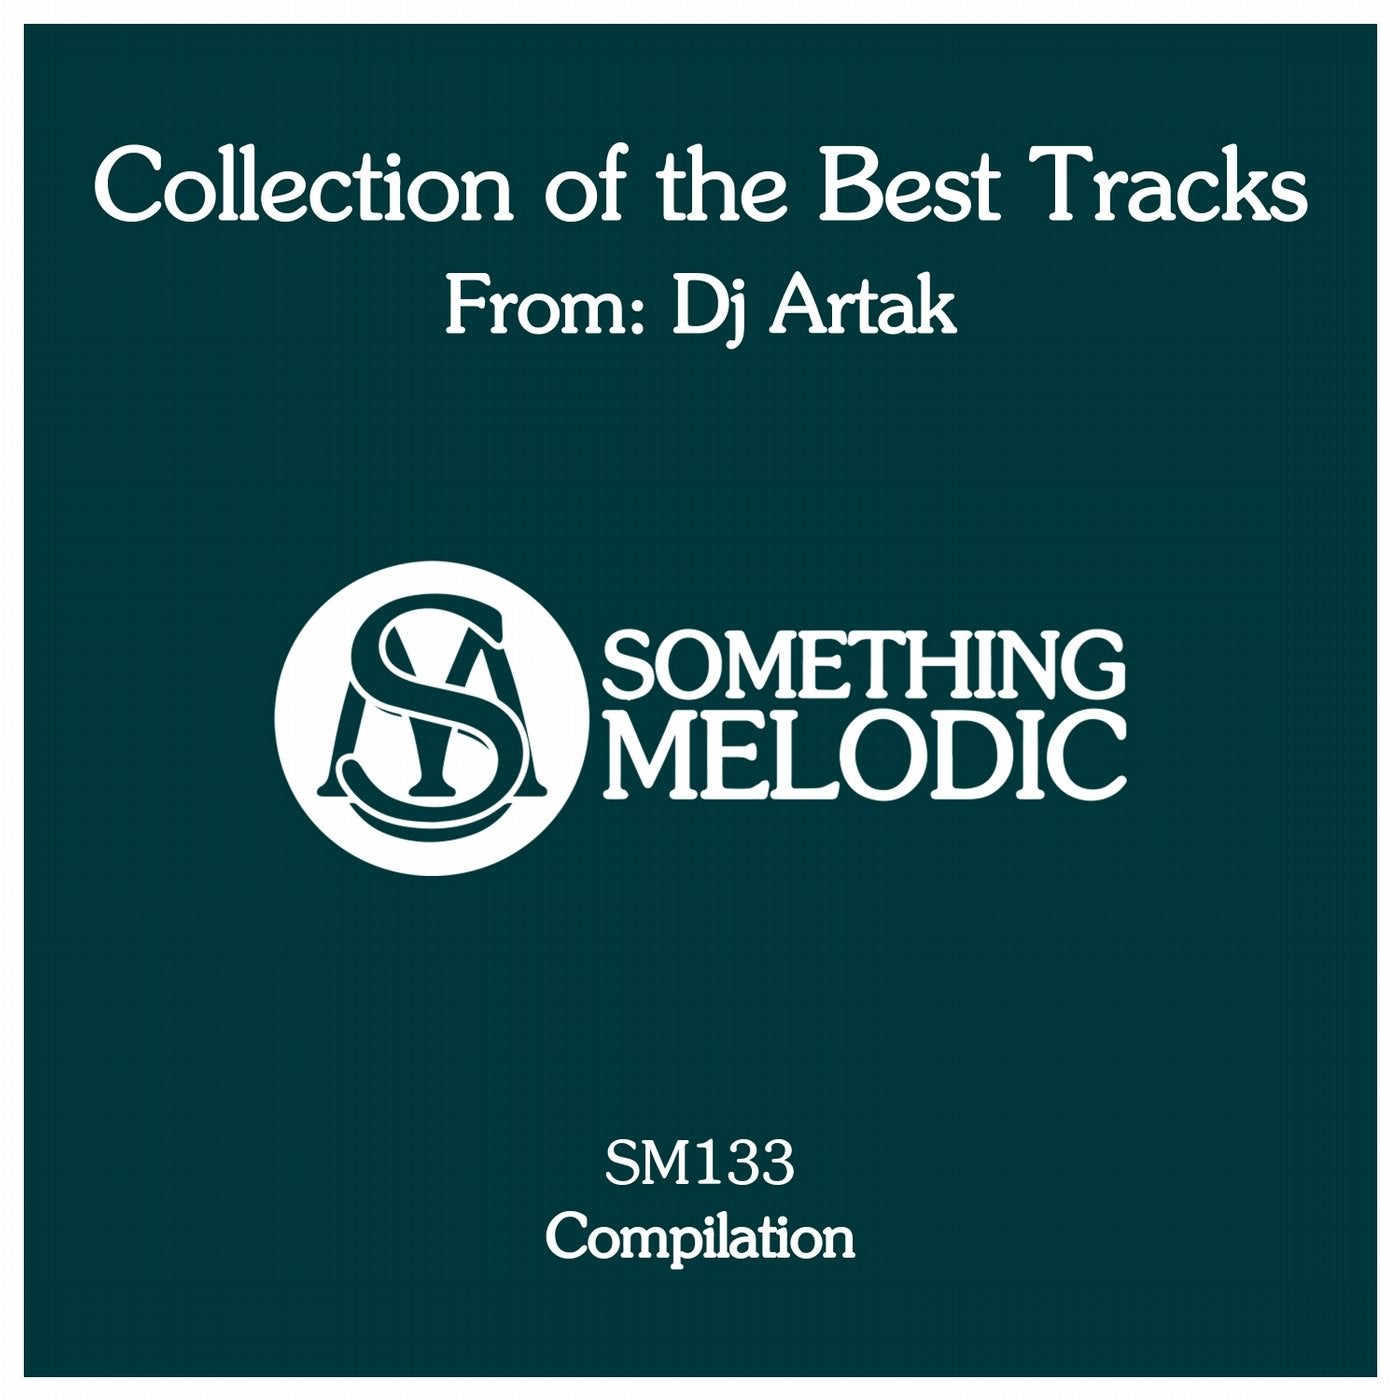 Collection of the Best Tracks From: DJ Artak